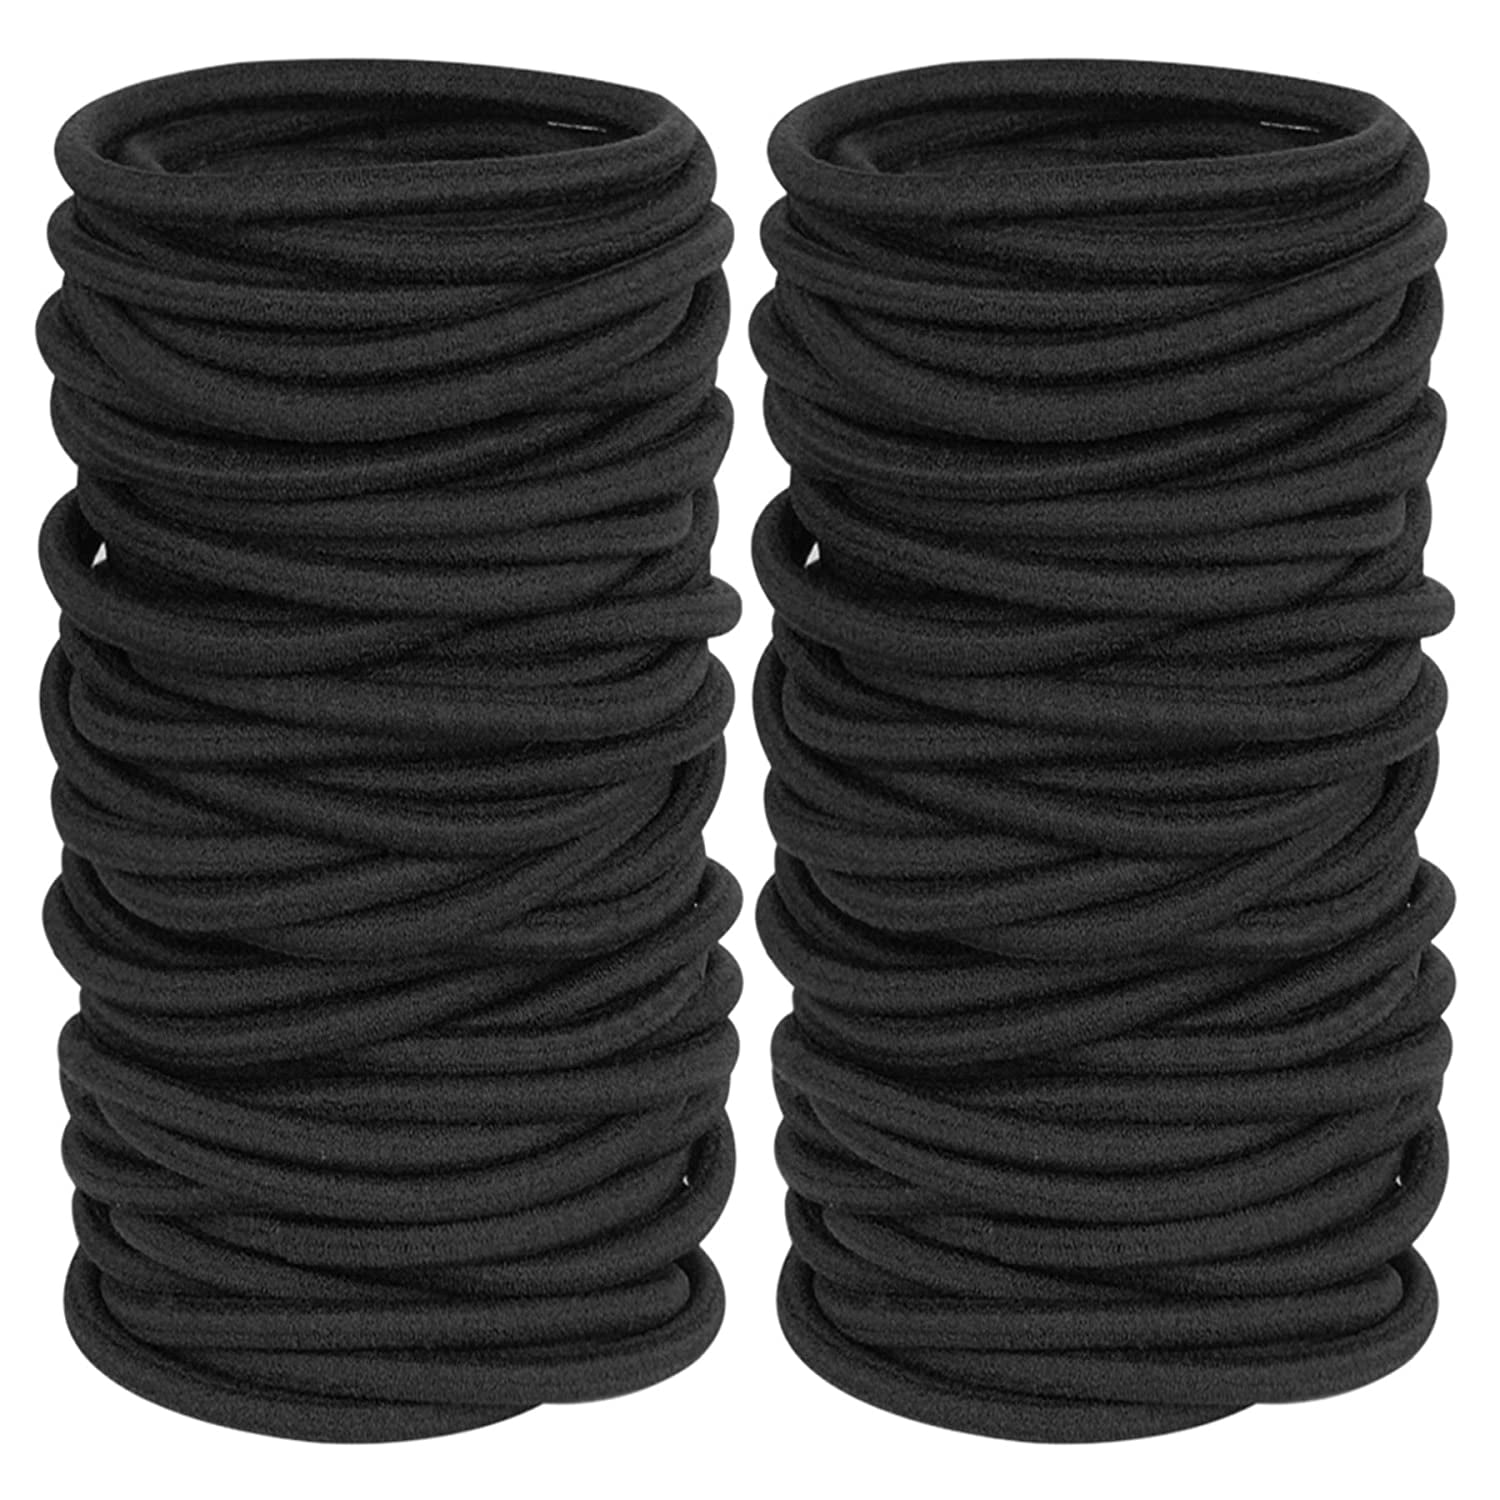 120 Pieces Black Hair Ties for Thick and Curly Hair Ponytail Holders Hair  Elastic Band for Women or Men(4mm), Casewin 